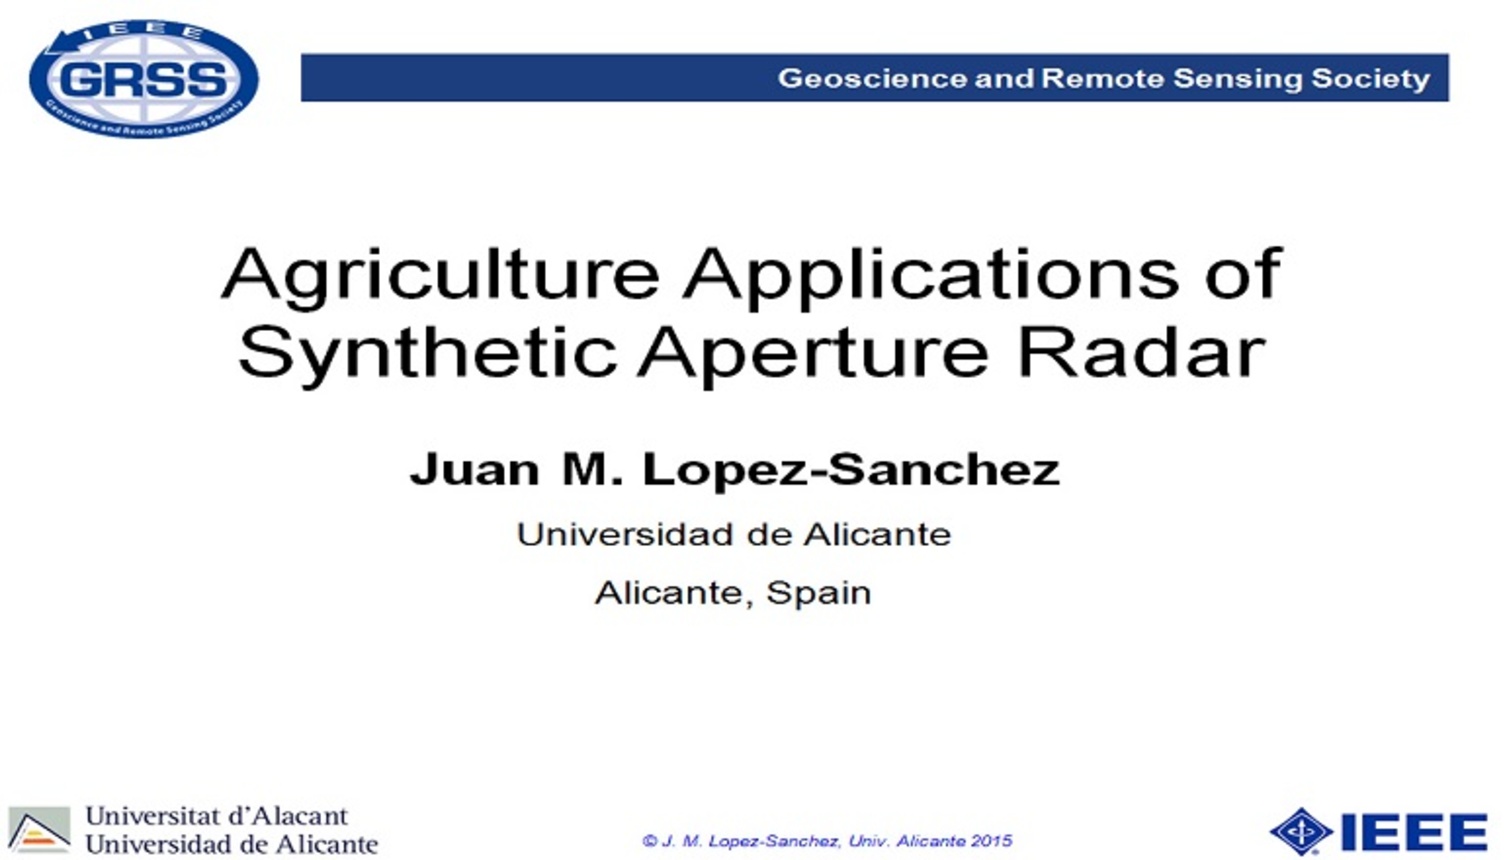 Agriculture Applications of Synthetic Aperture Radar